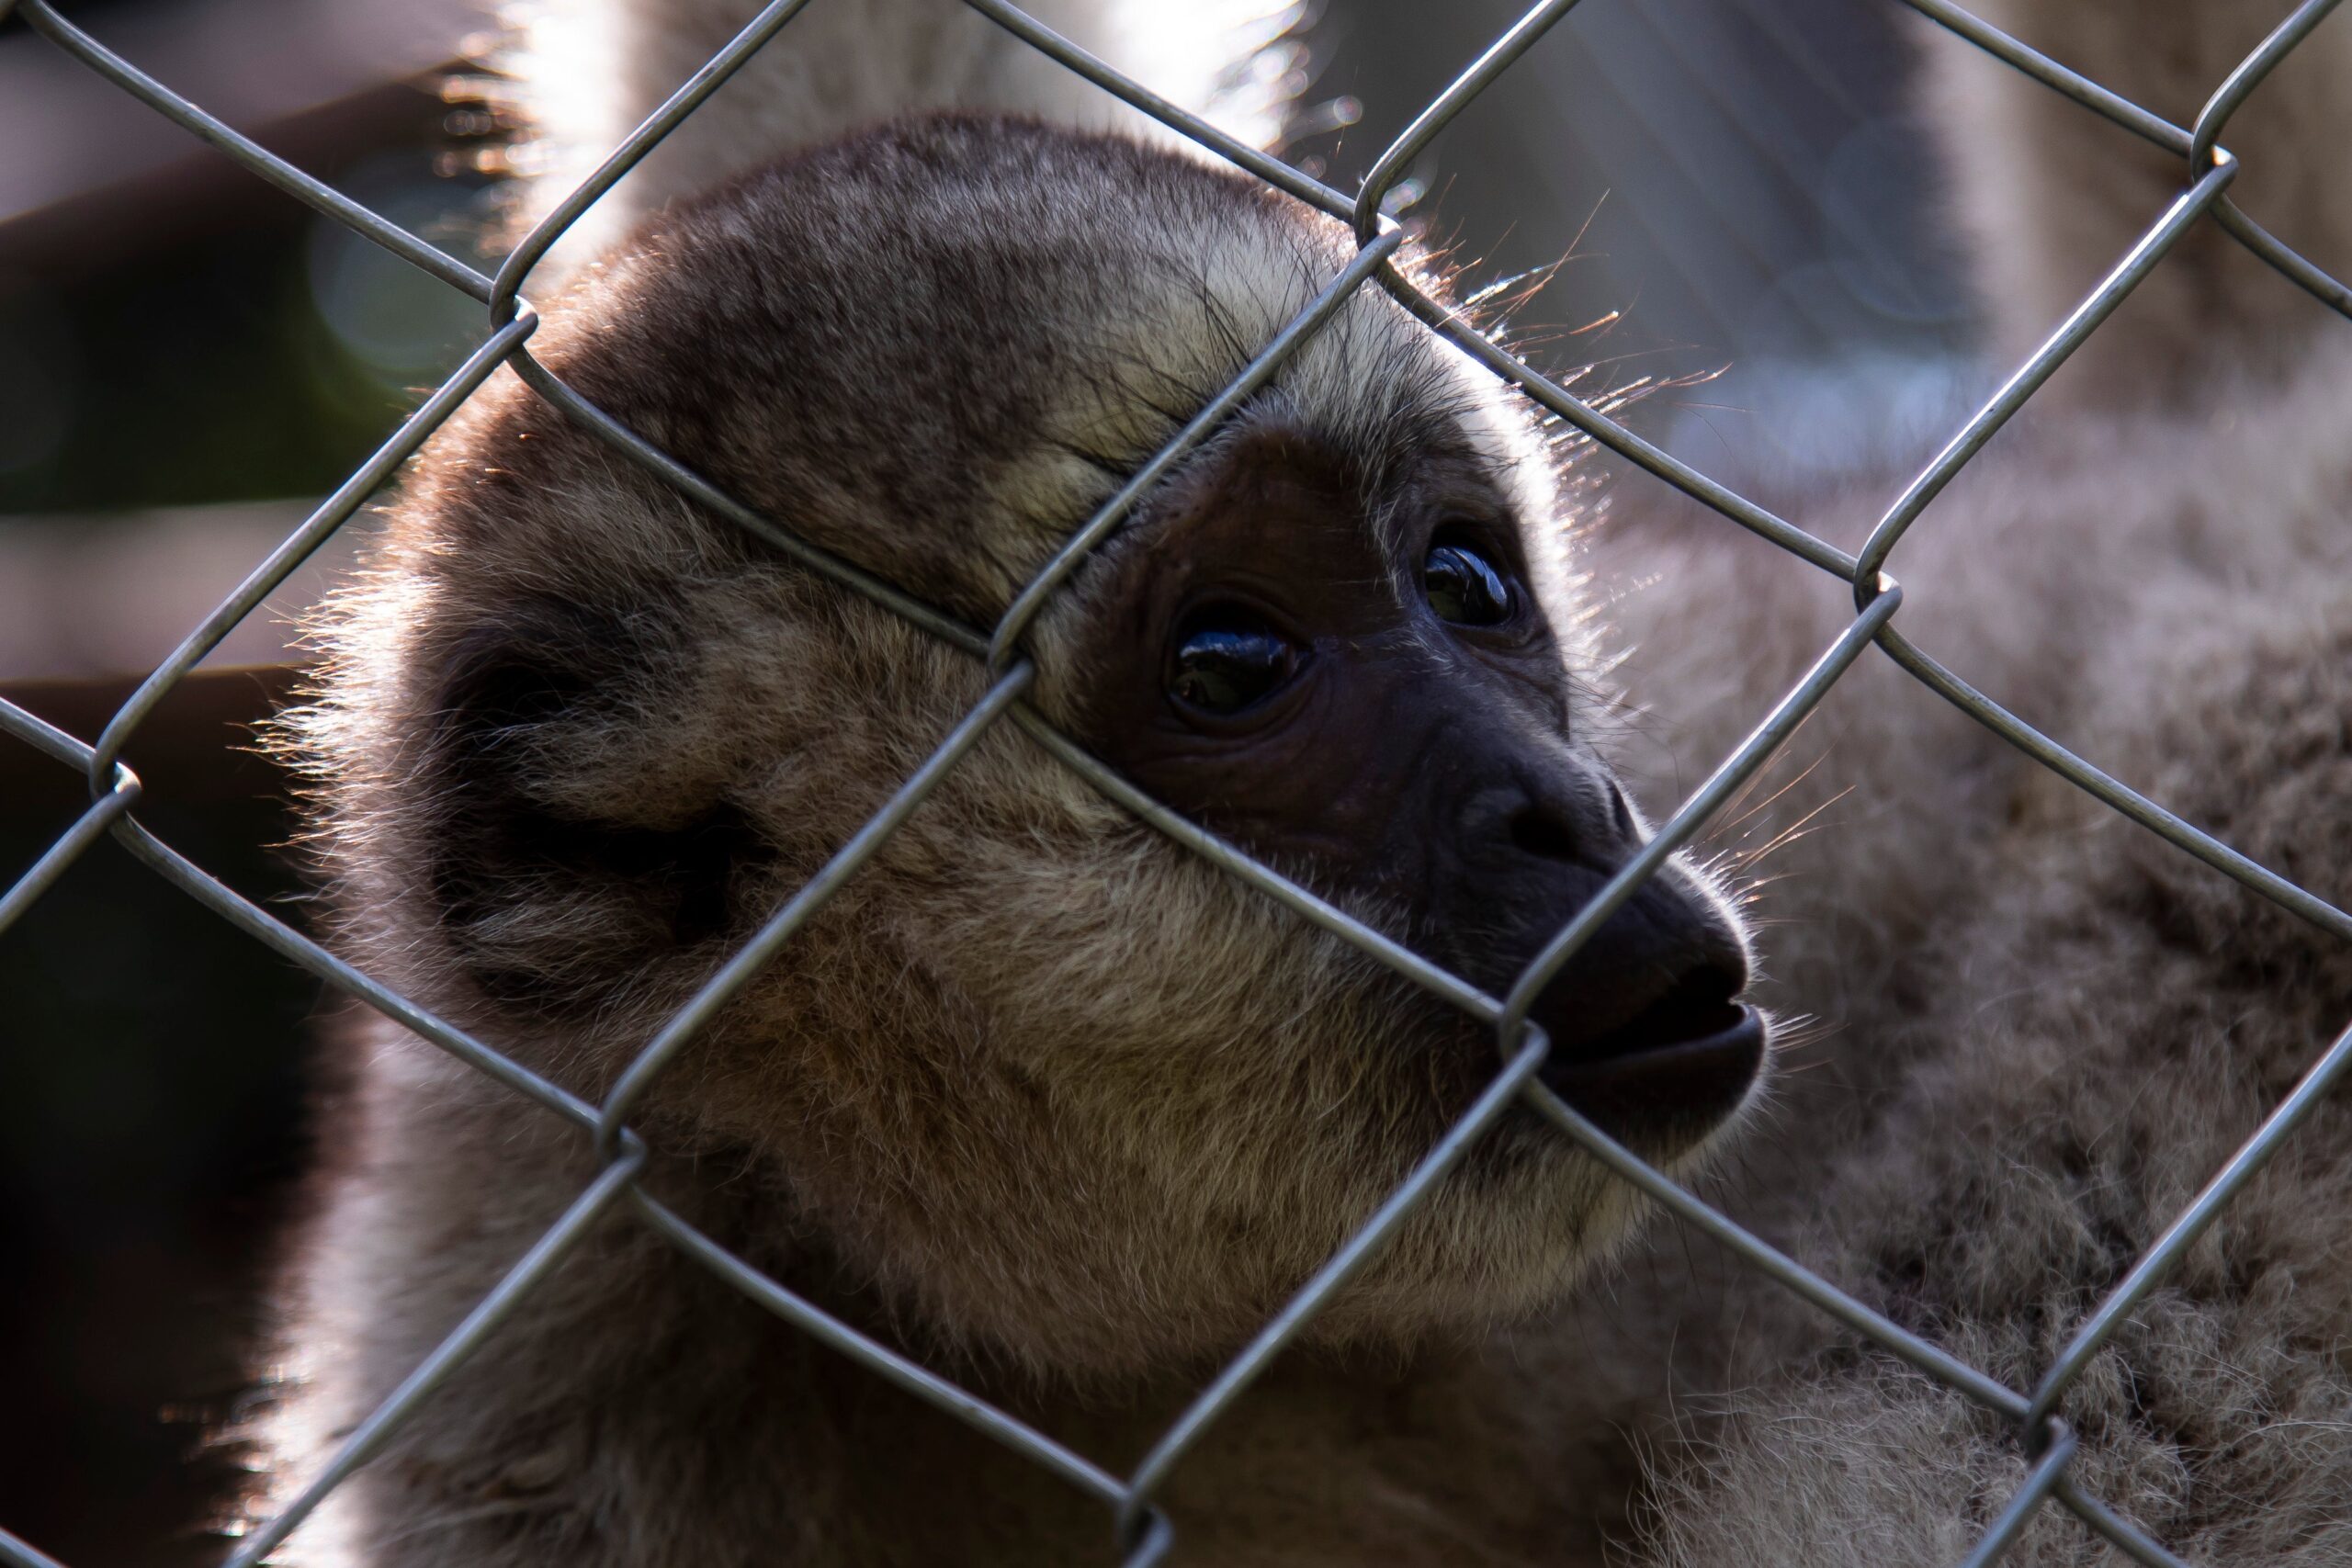 A close-up shot of an endangered monkey in brazil behind a fence